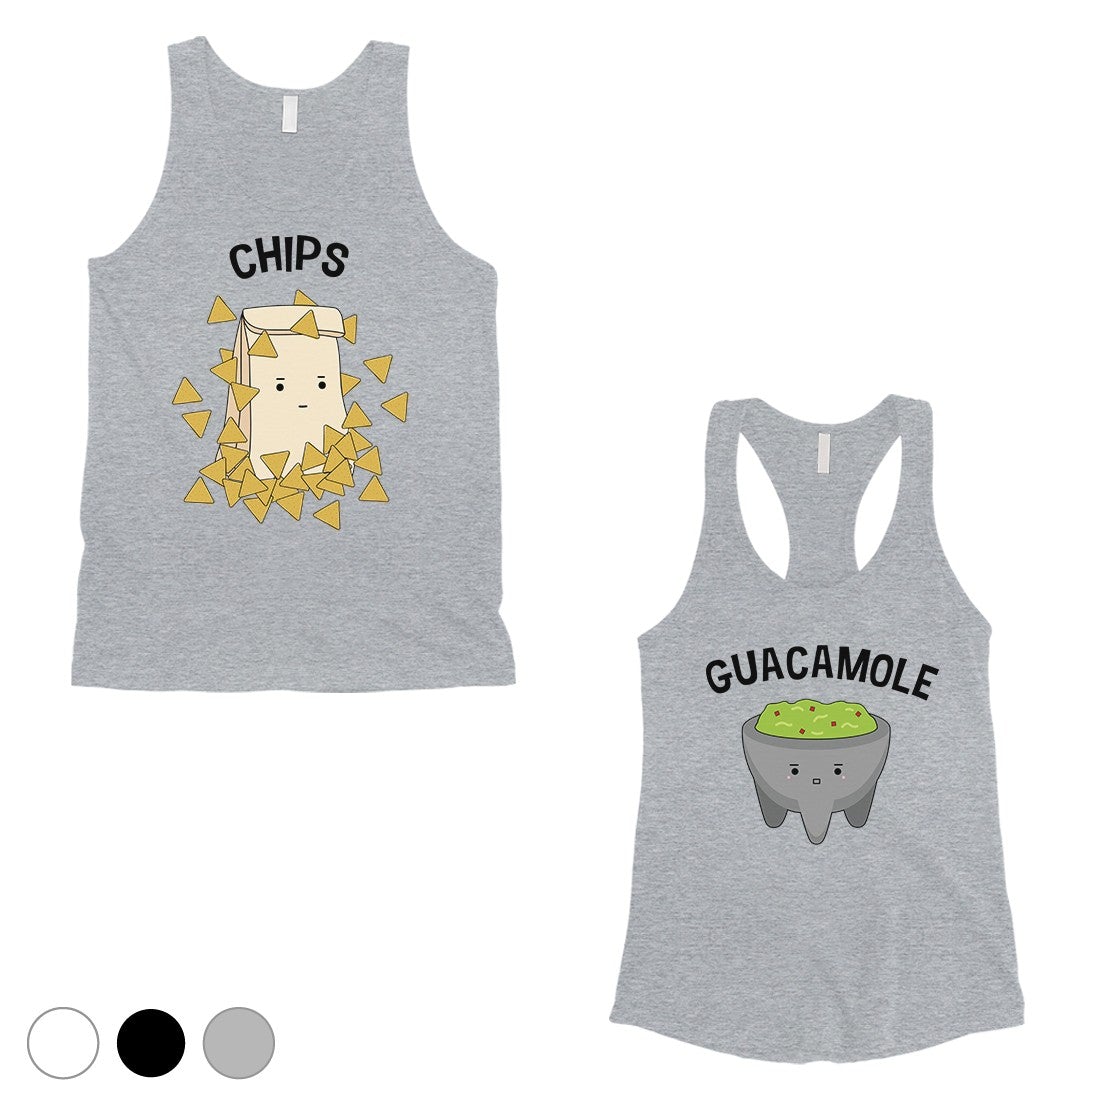 Chips & Guacamole Matching Couple Tank Tops Funny Wedding Gift Gray